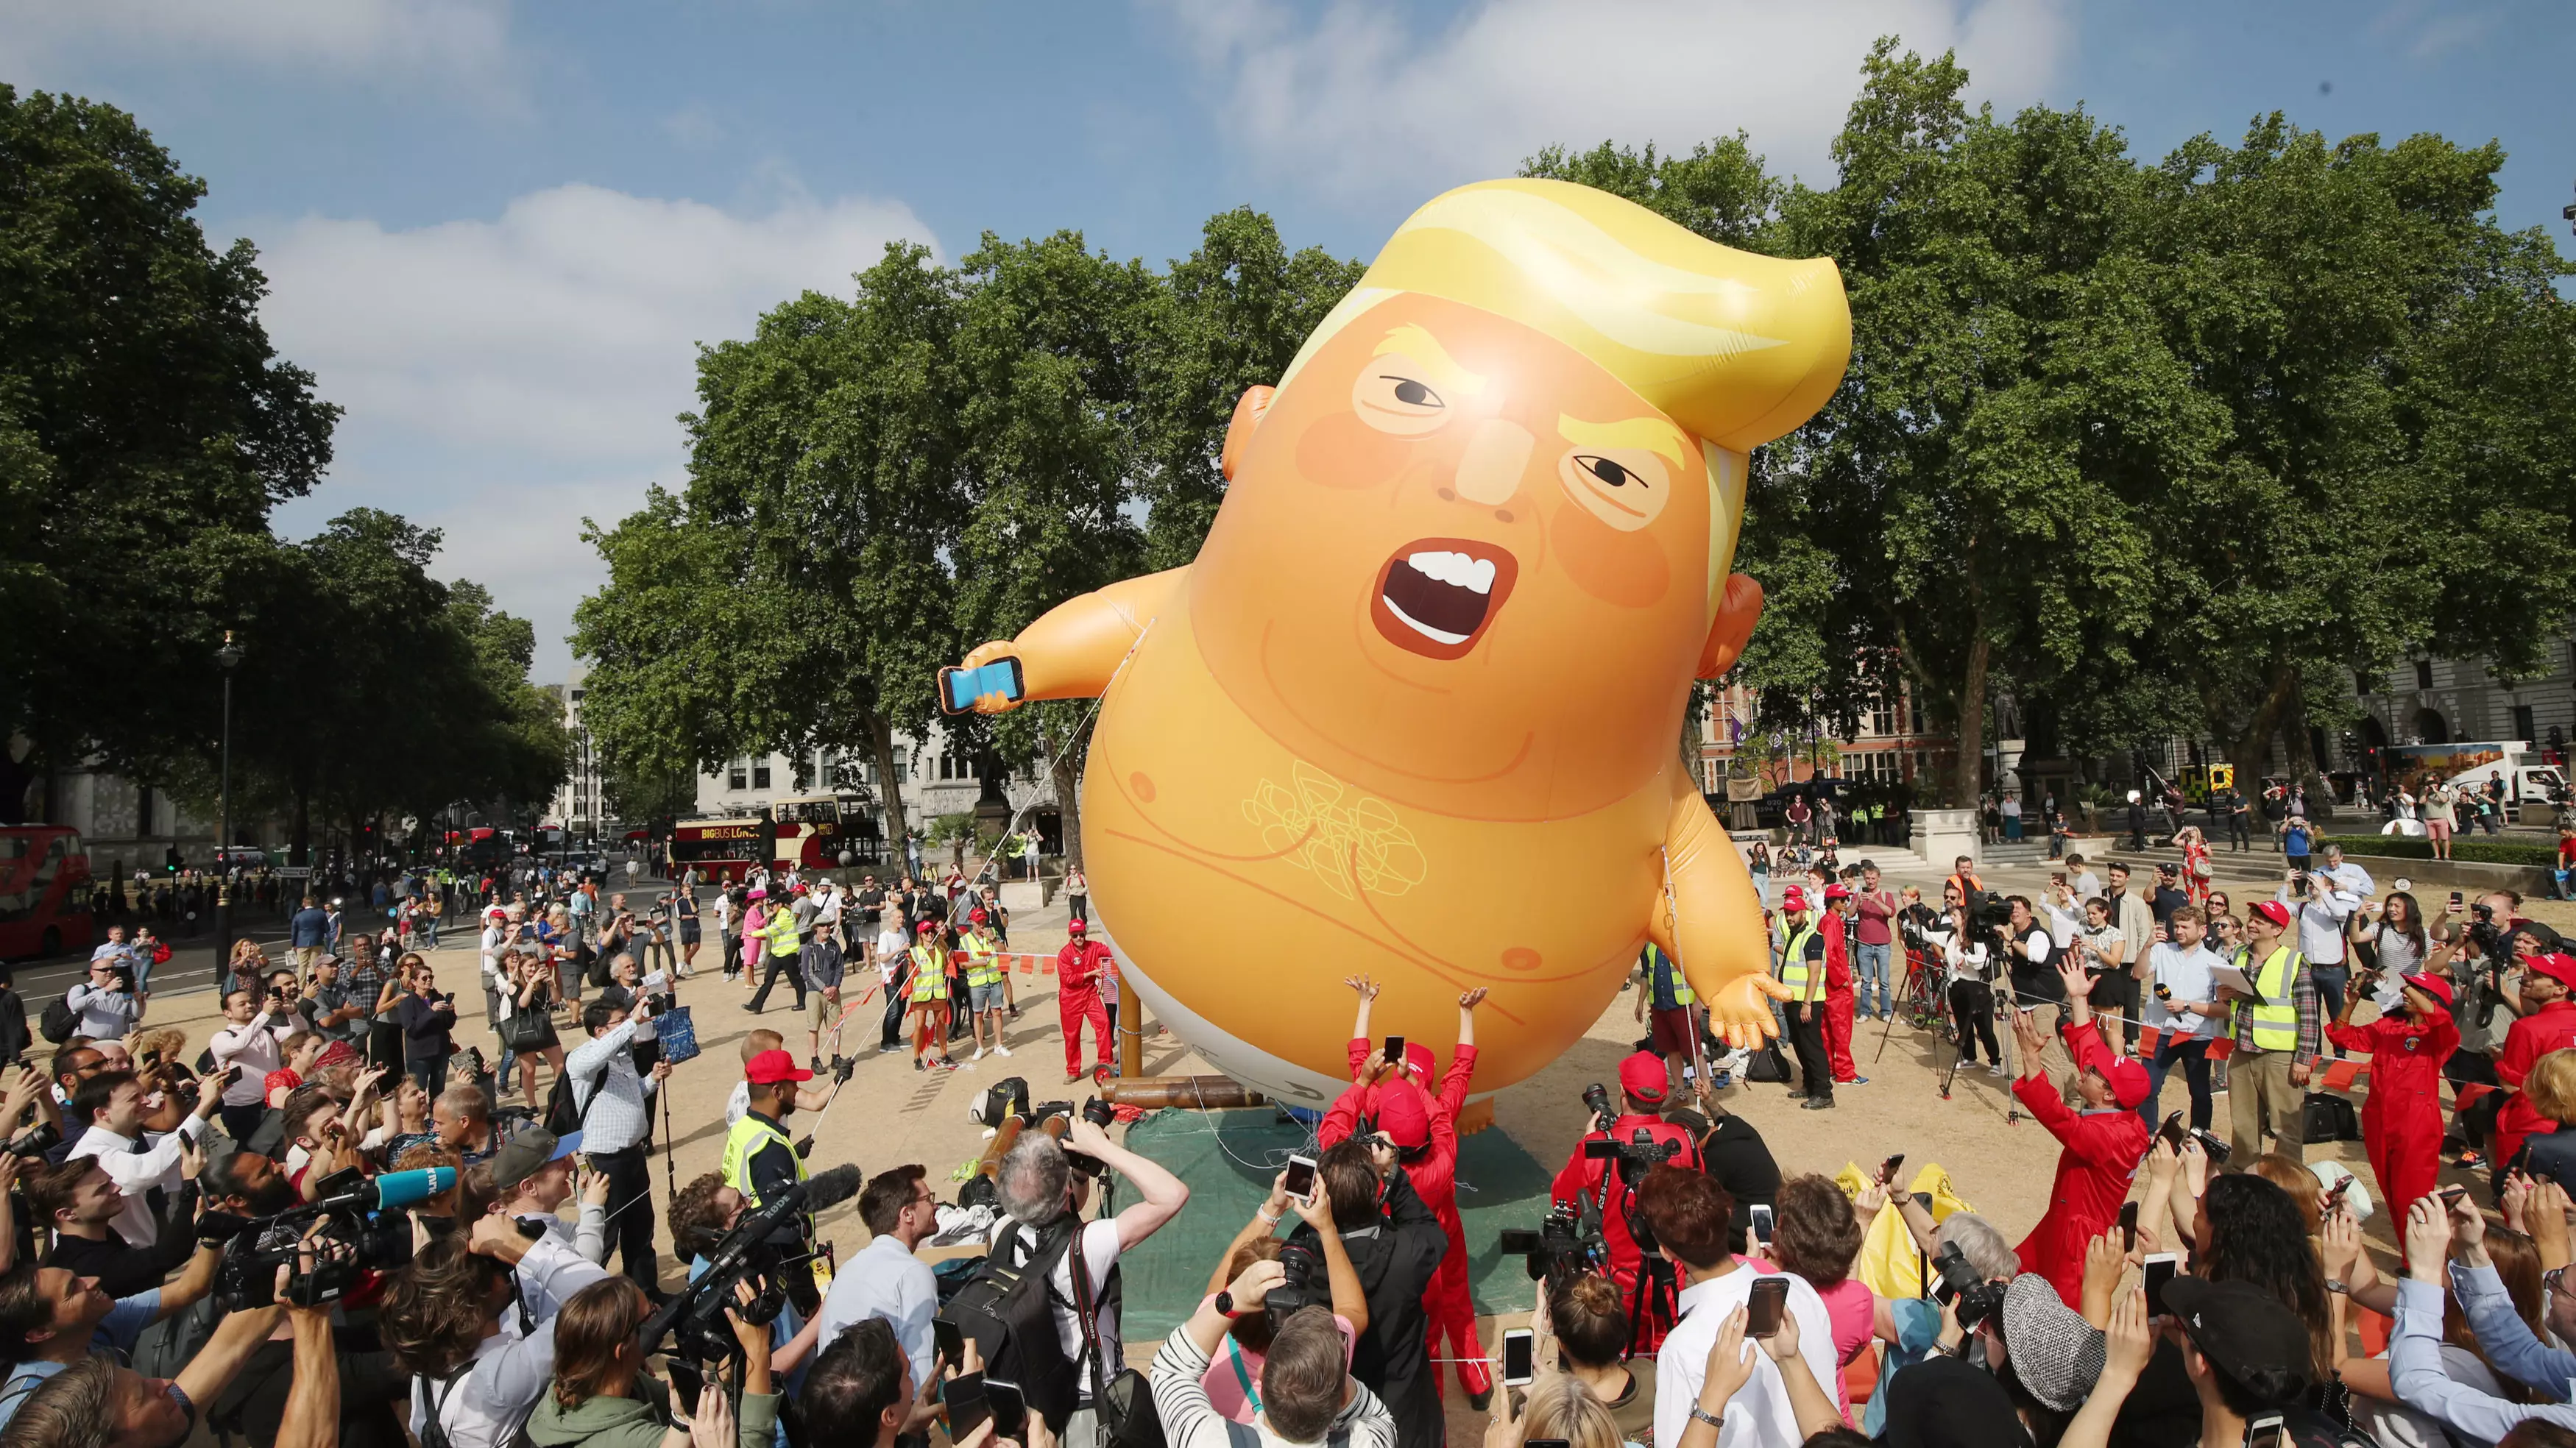 Giant Donald Trump Baby Balloon Has Been Pulled Down 